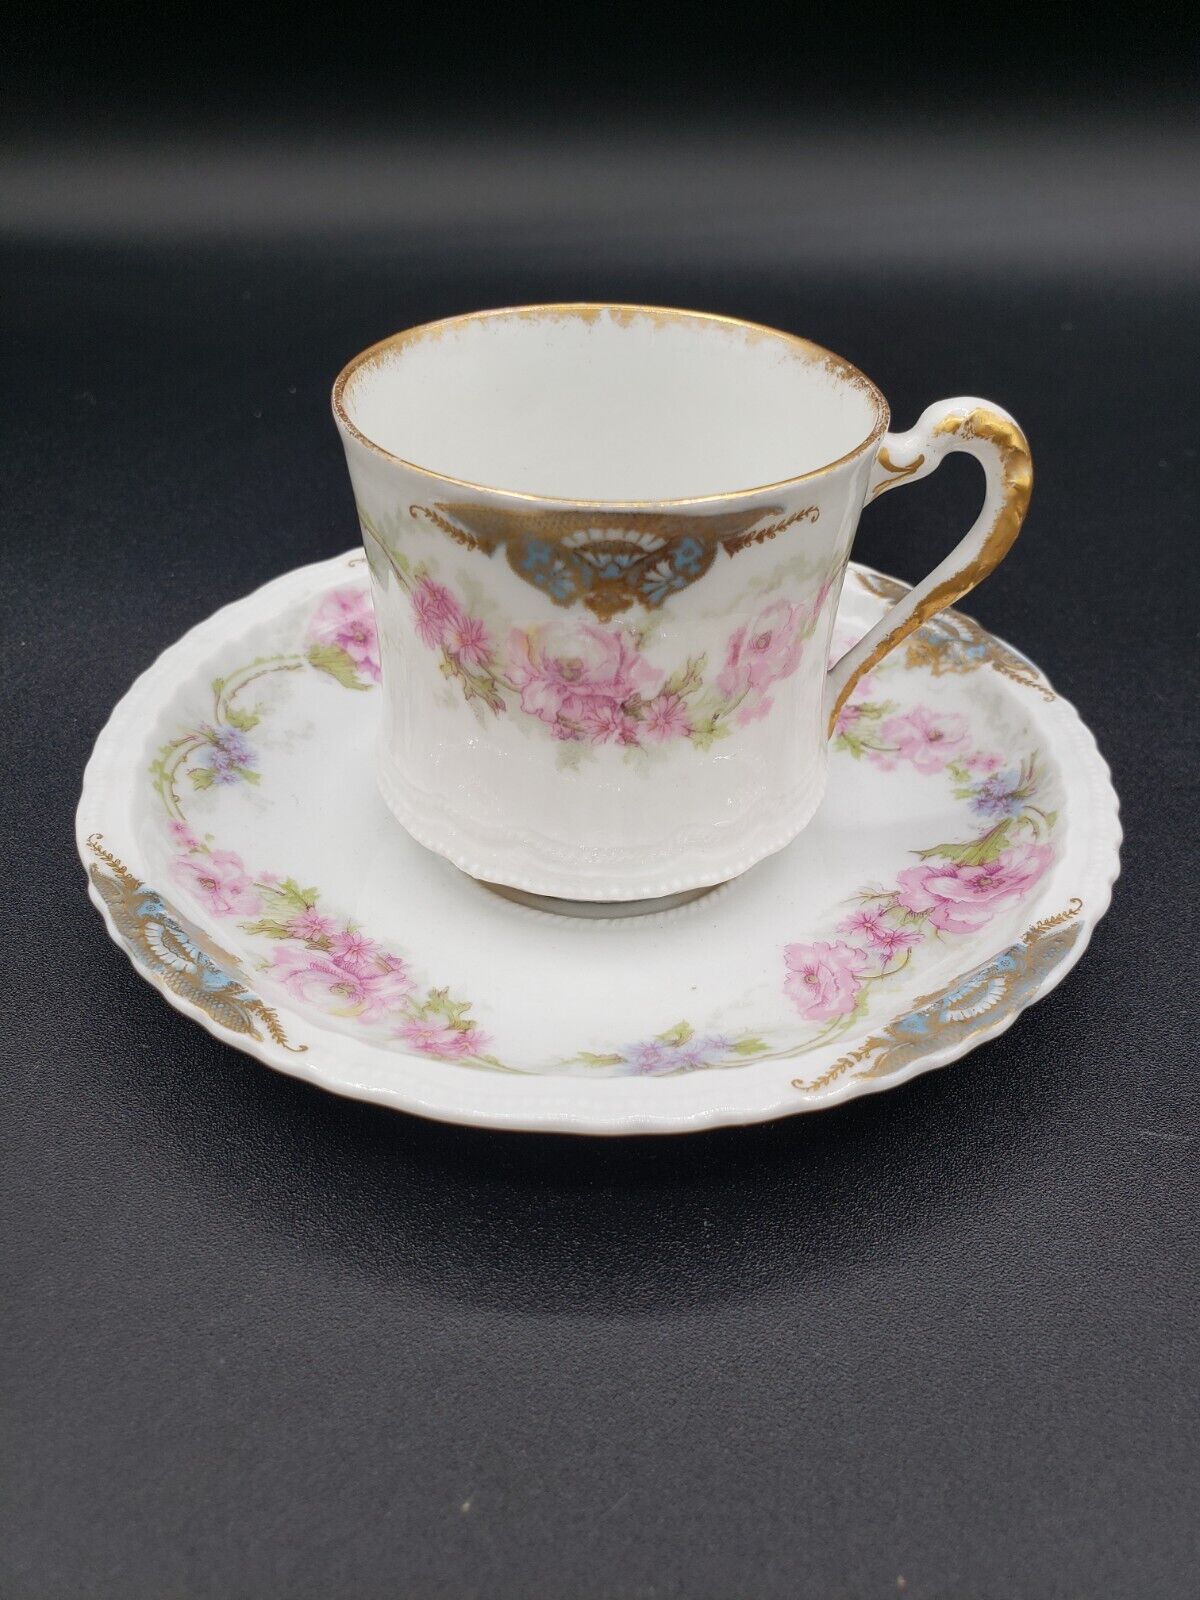 Antique Theodore Haviland France  Limoges Tea Cup And Saucer